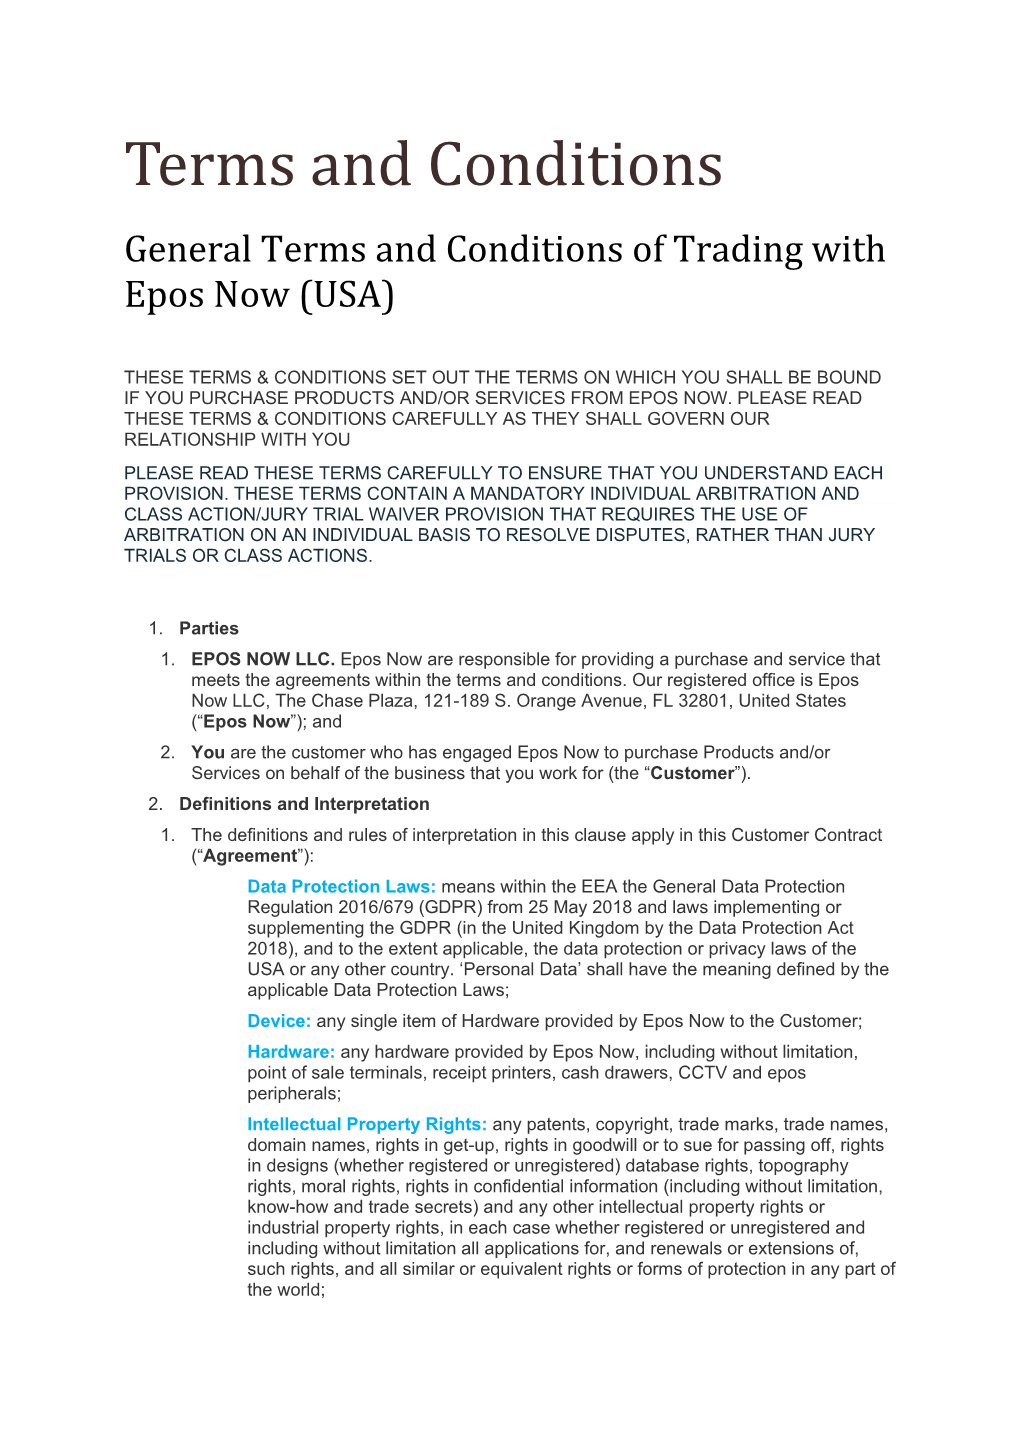 Terms and Conditions General Terms and Conditions of Trading with Epos Now (USA)